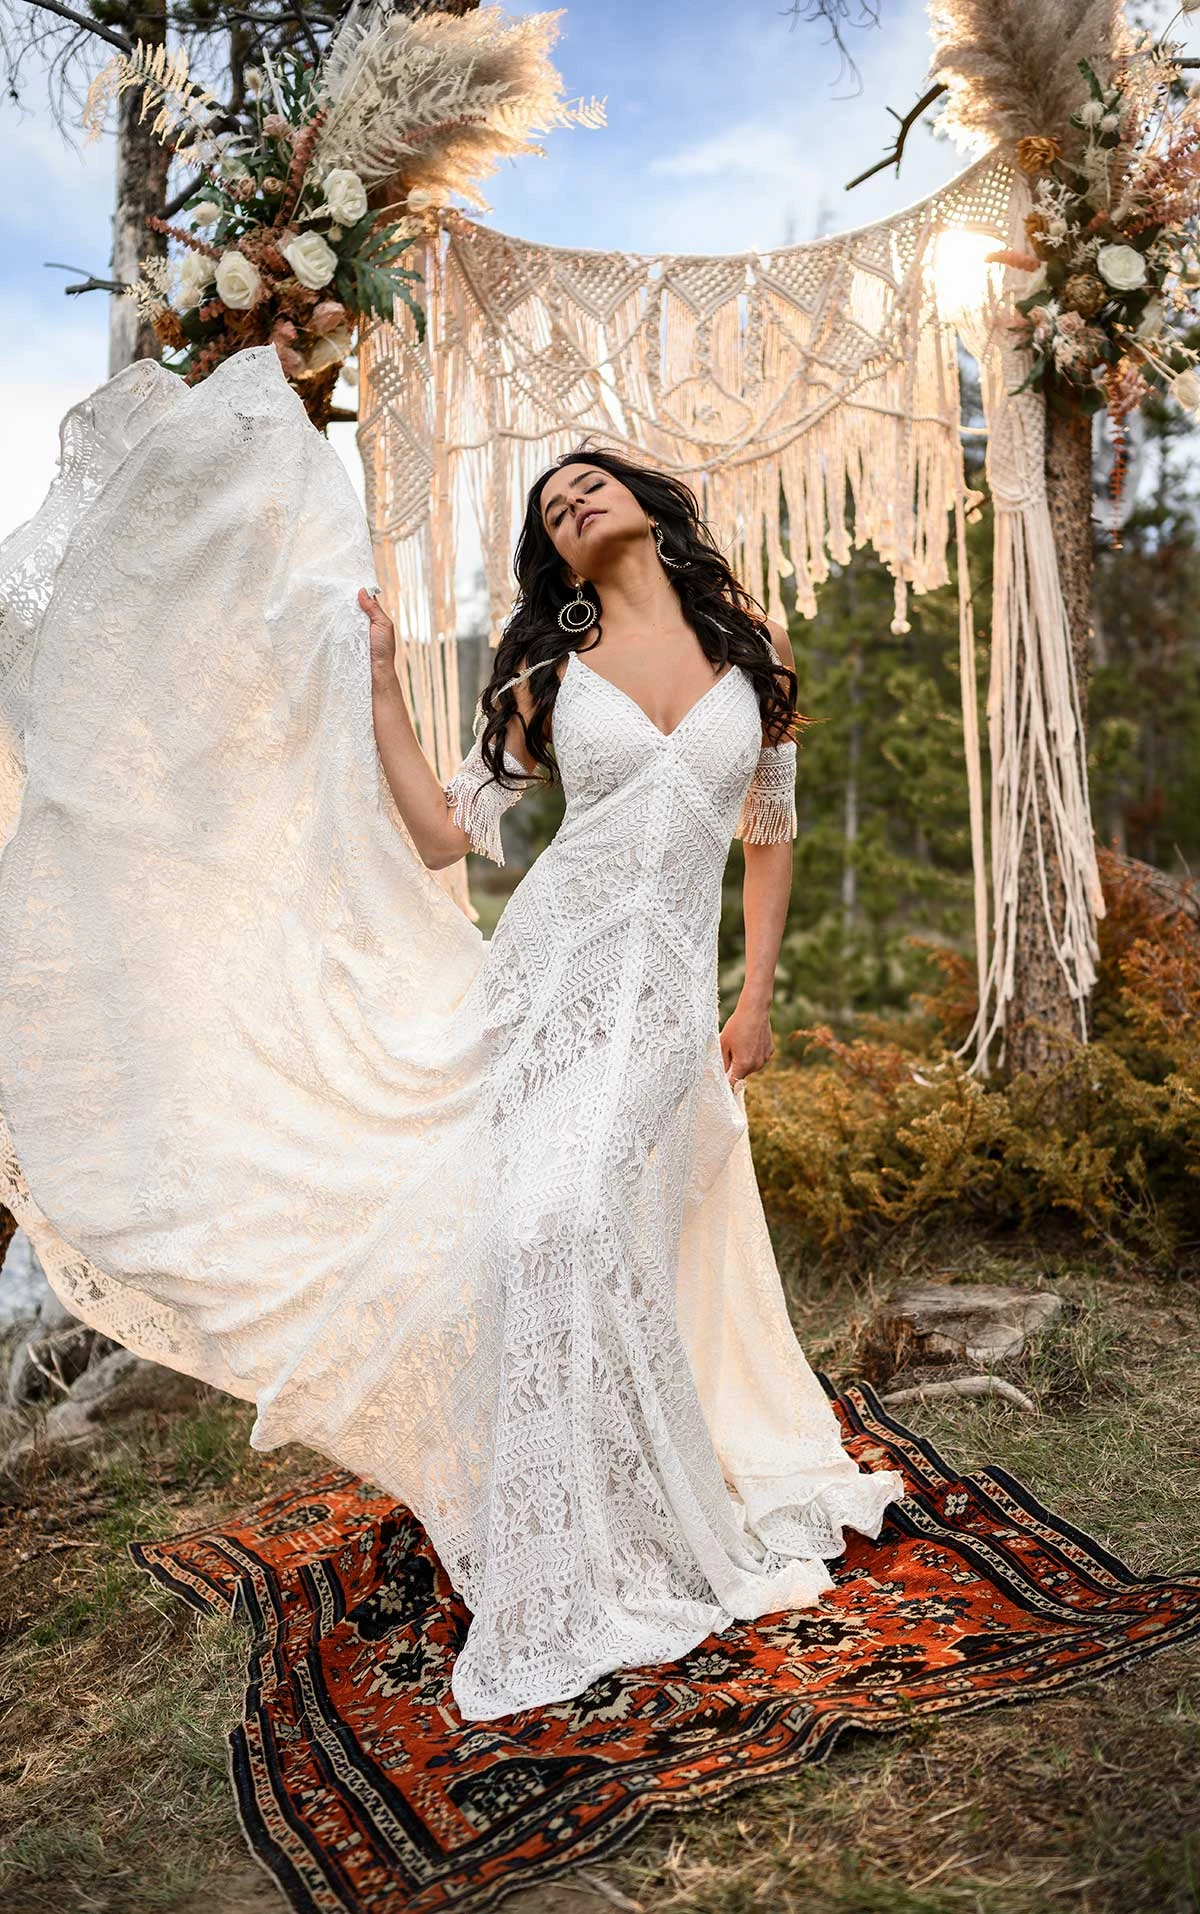 Modern Boho Wedding Dress with Linear Lace Details All